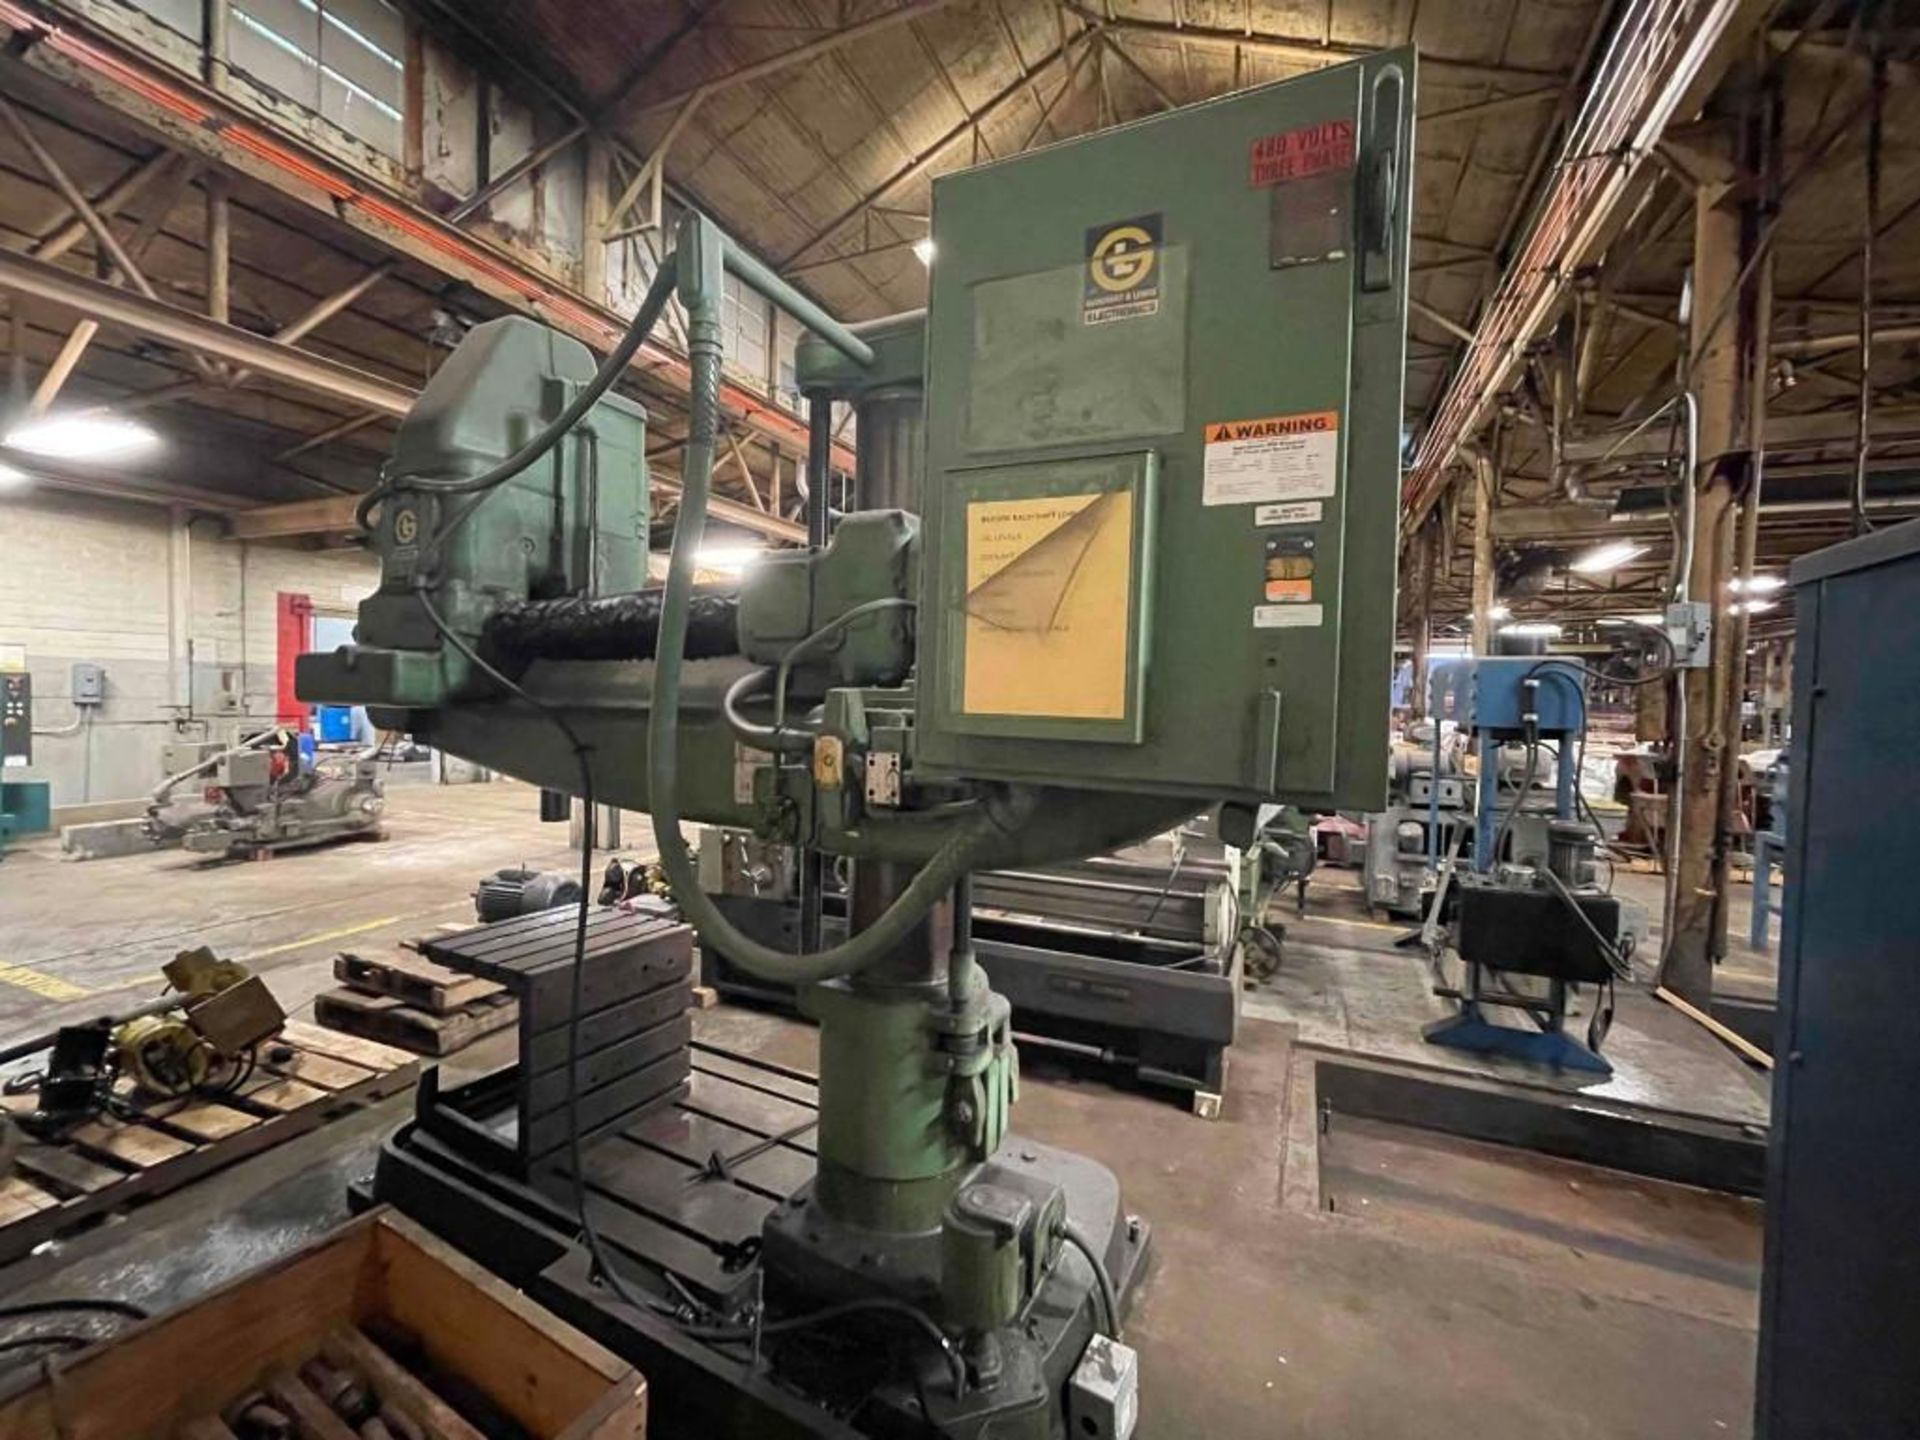 4' 13" Giddings & Lewis Brickford Chipmaster Radial Arm Drill; (OK location) - Image 8 of 14